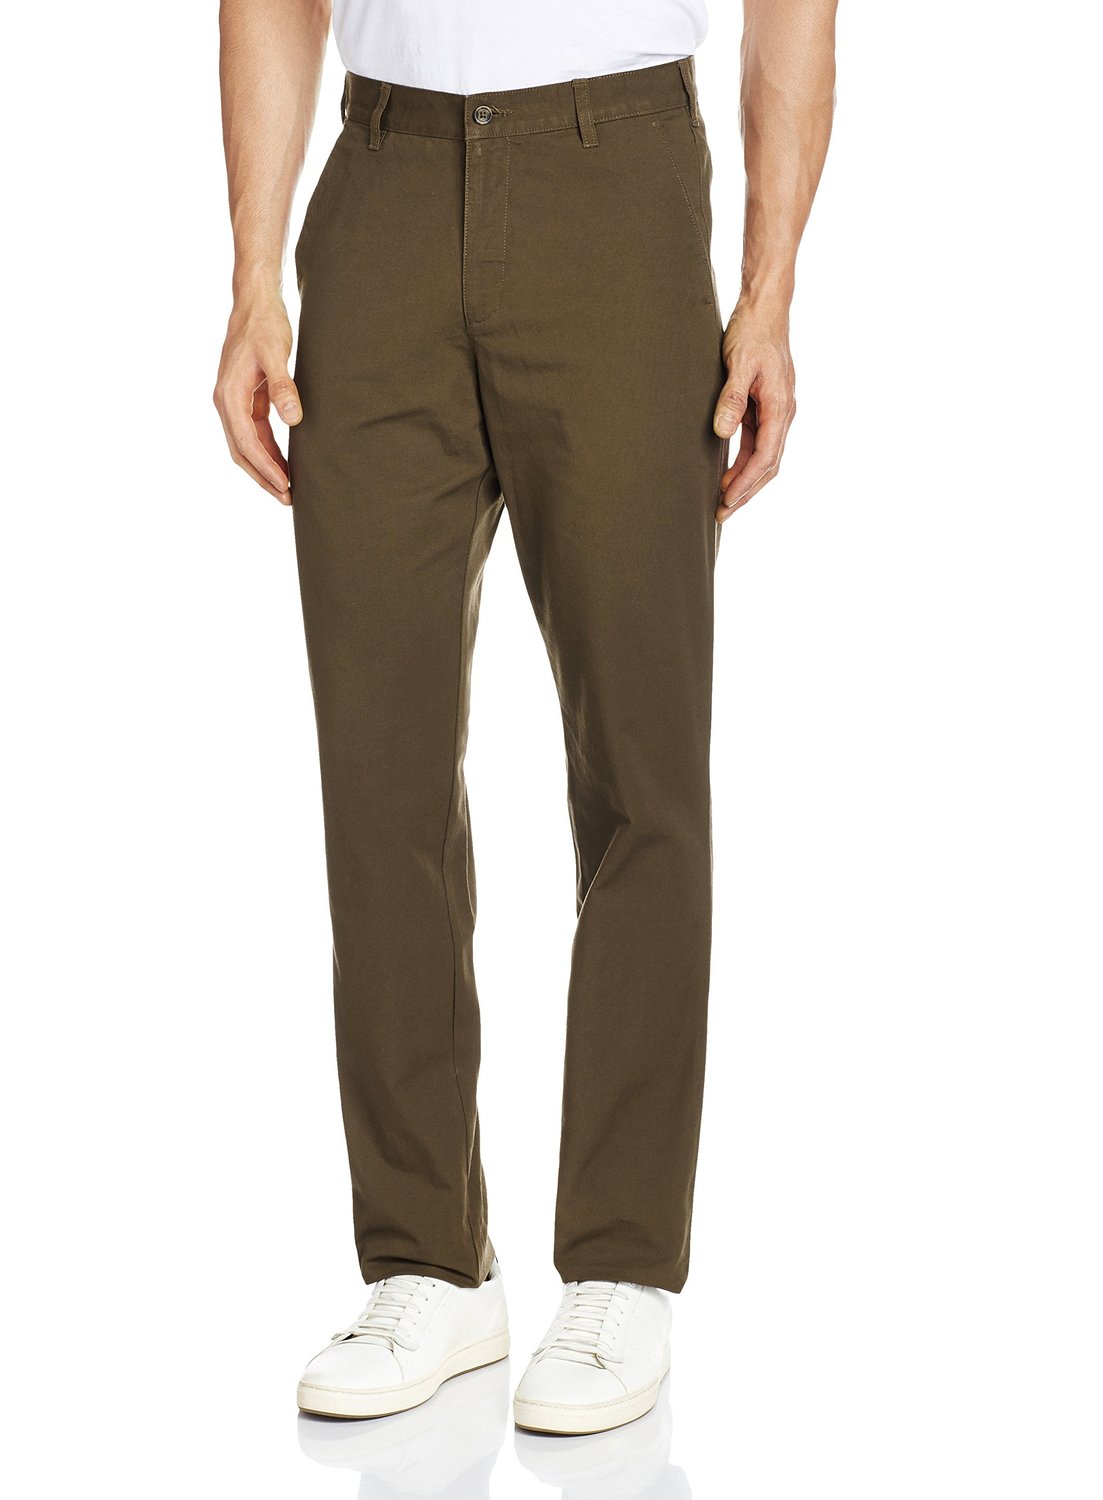 Buy Mens Green Formal Trouser Online @ ₹790 from ShopClues